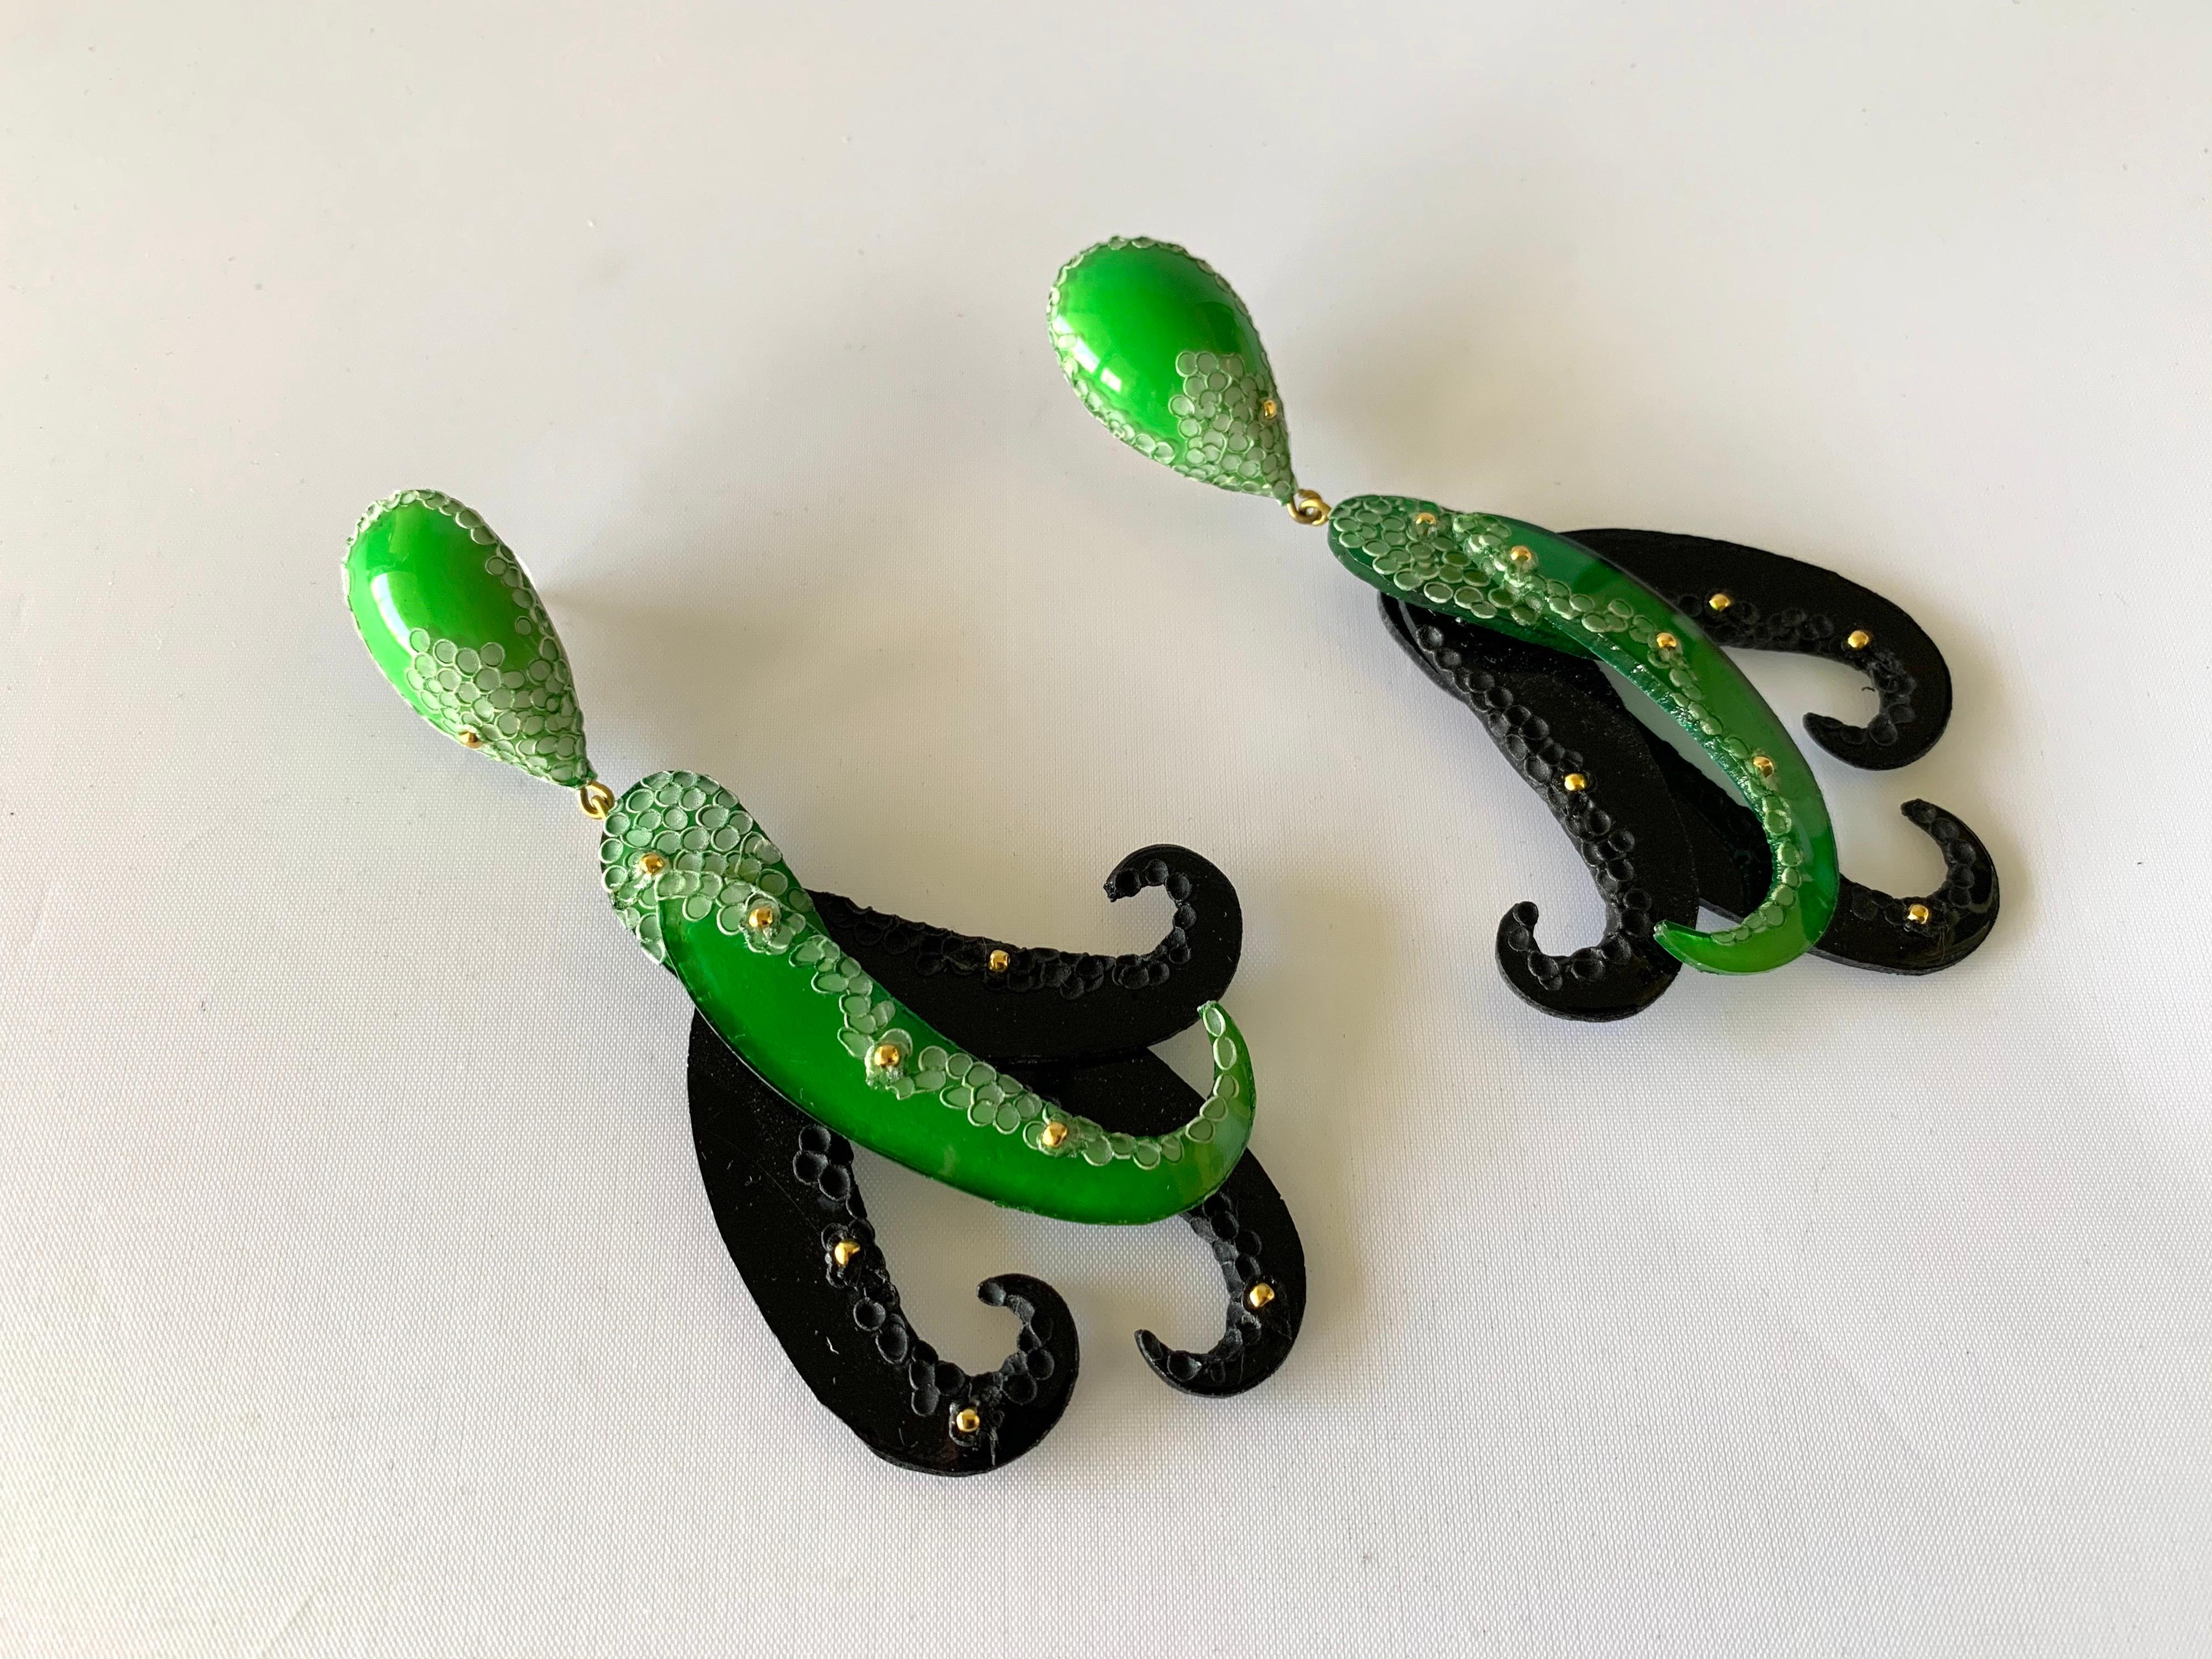 Light and easy to wear, these handmade artisanal statement earrings were made in Paris by Cilea. The lightweight earrings feature giant sea creature tentacles, comprised out of enamel and resin in black and green. A unique pair of well-crafted